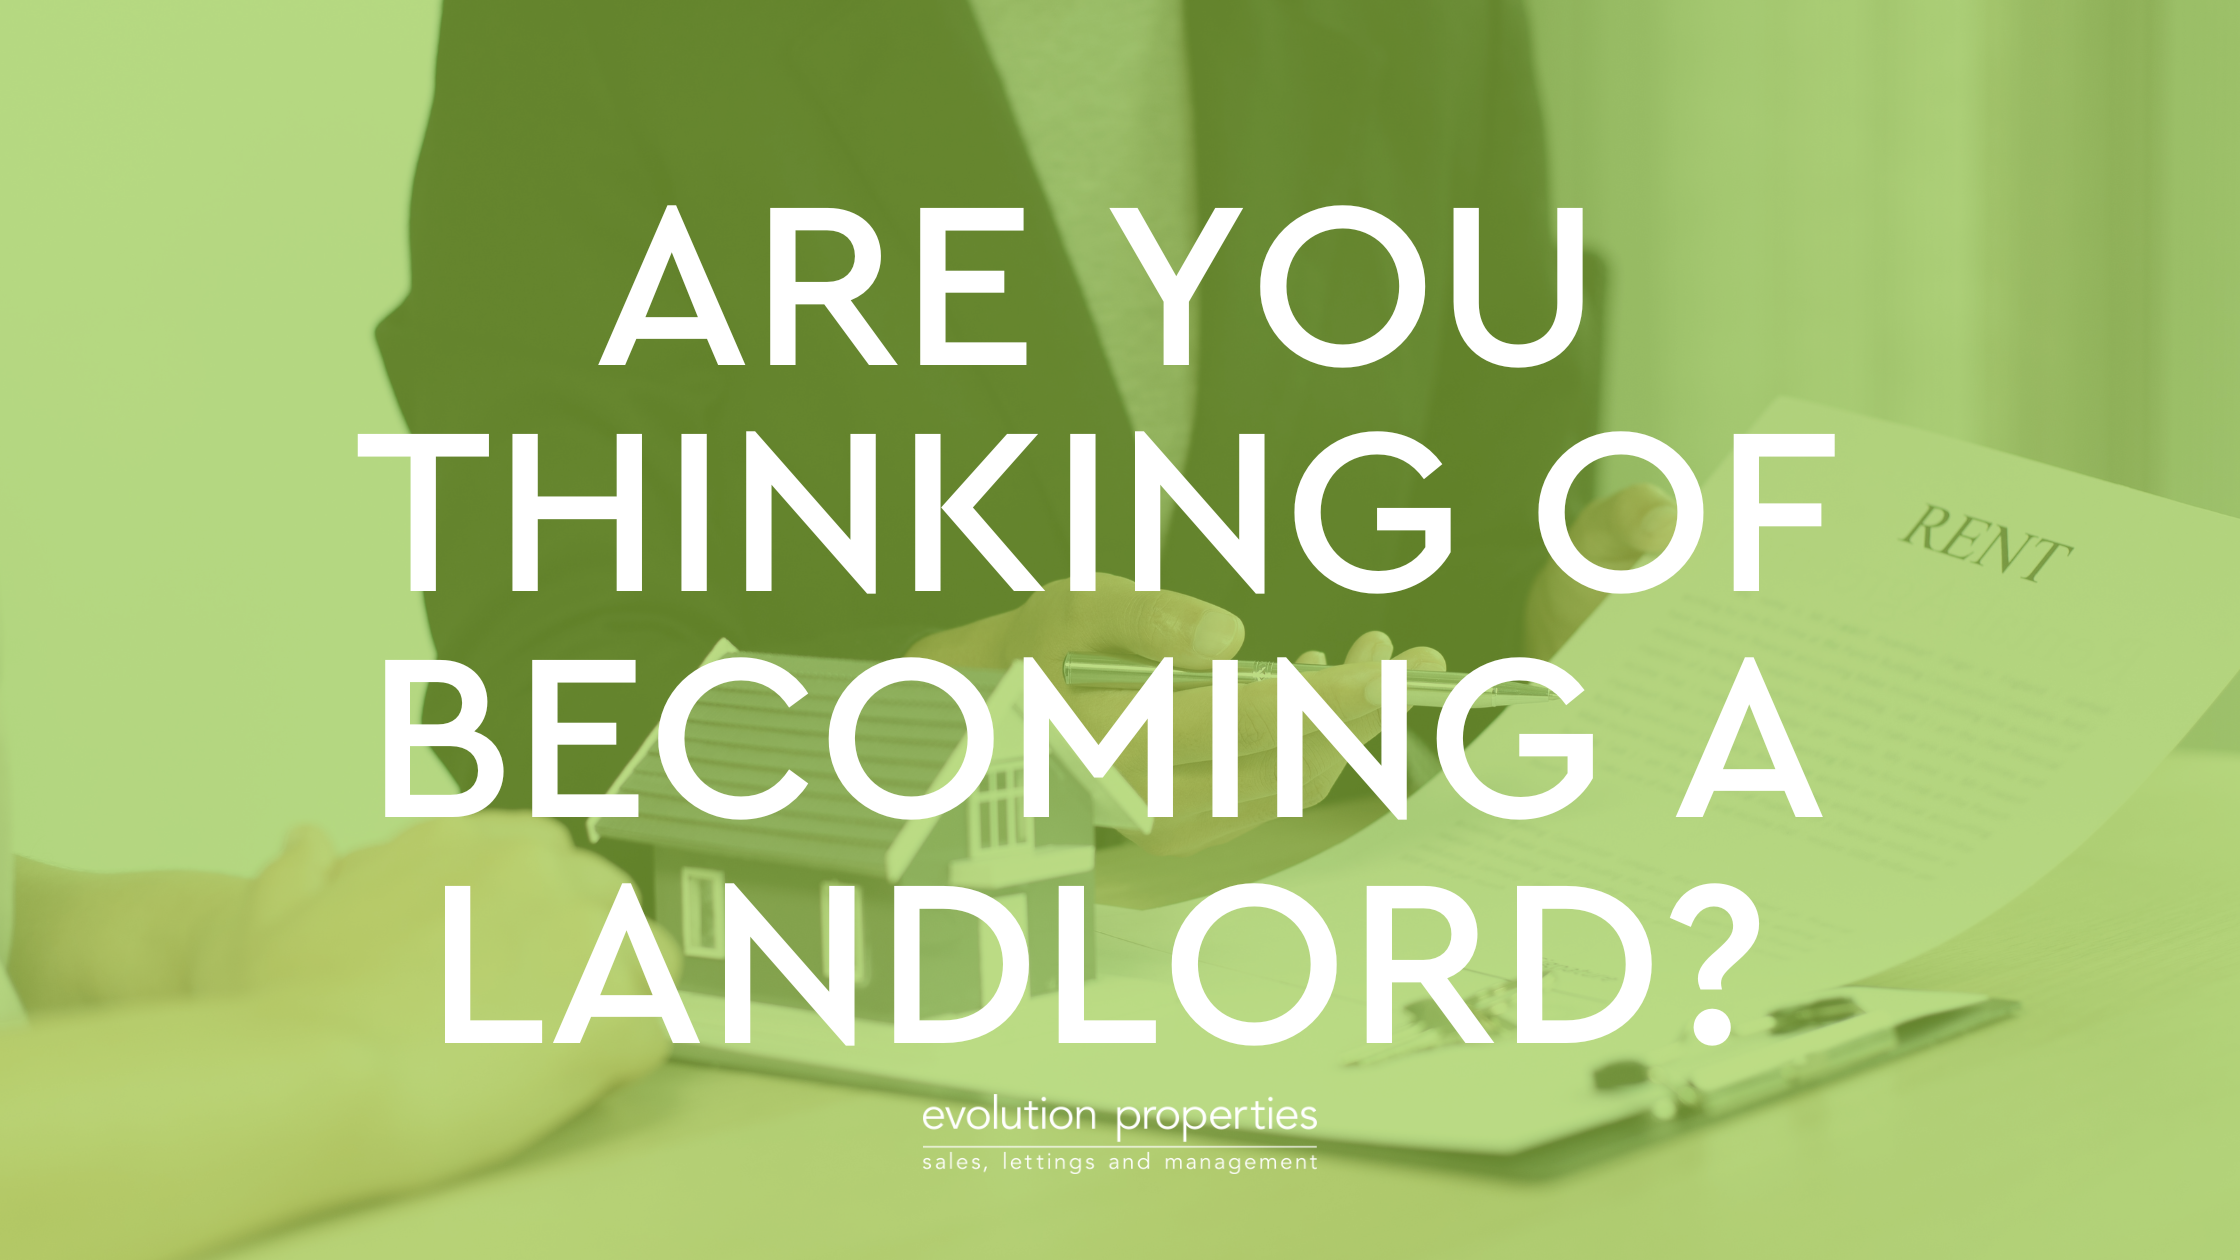 Are you thinking of becoming a landlord?